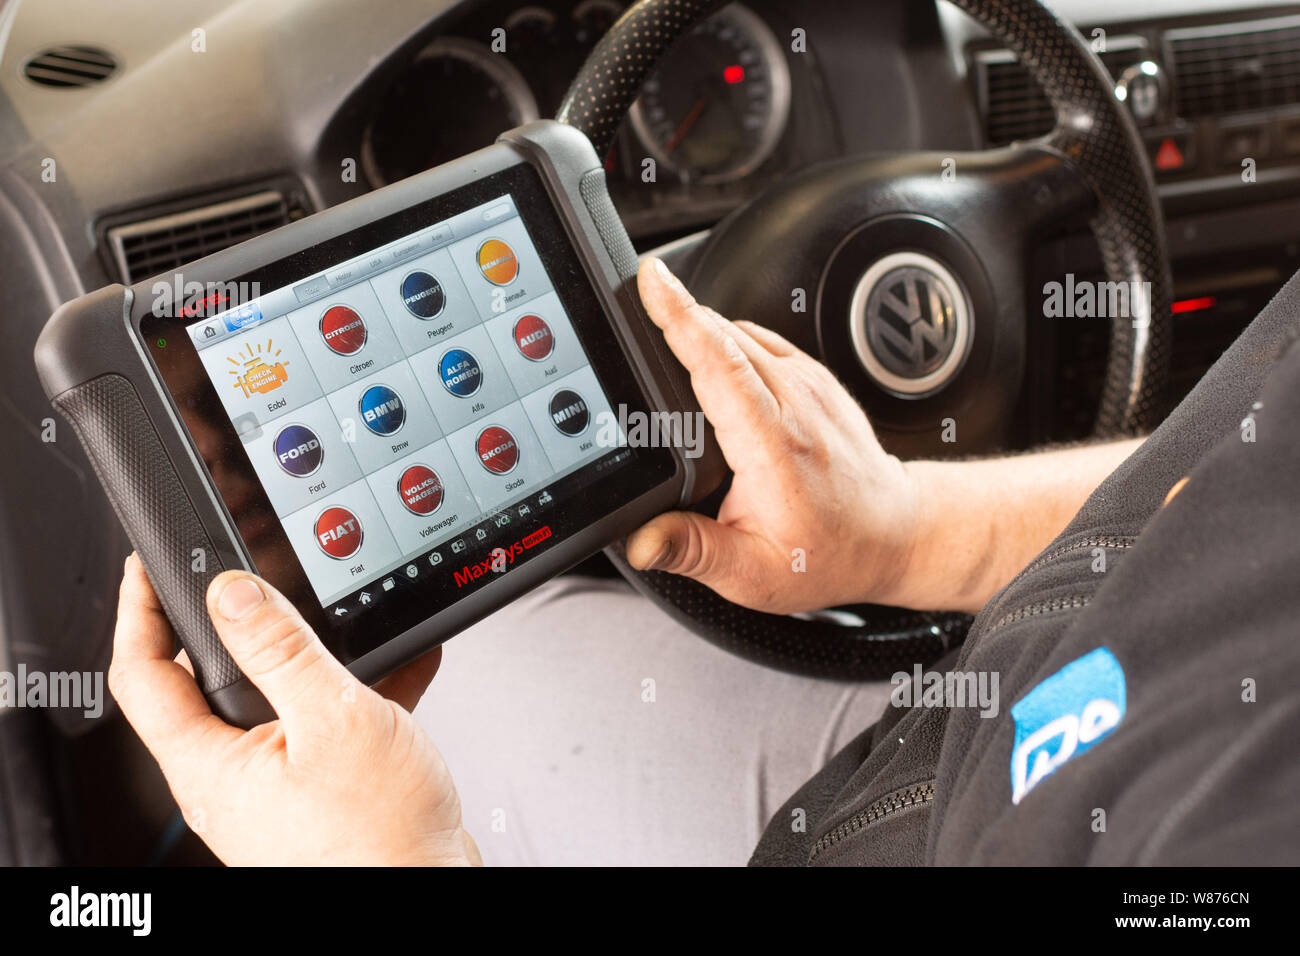 Garage: car mechanics. Worker using the touchscreen tablet of a car diagnostic tool in the front seat of a Volkswagen car, to detect any potential eng Stock Photo